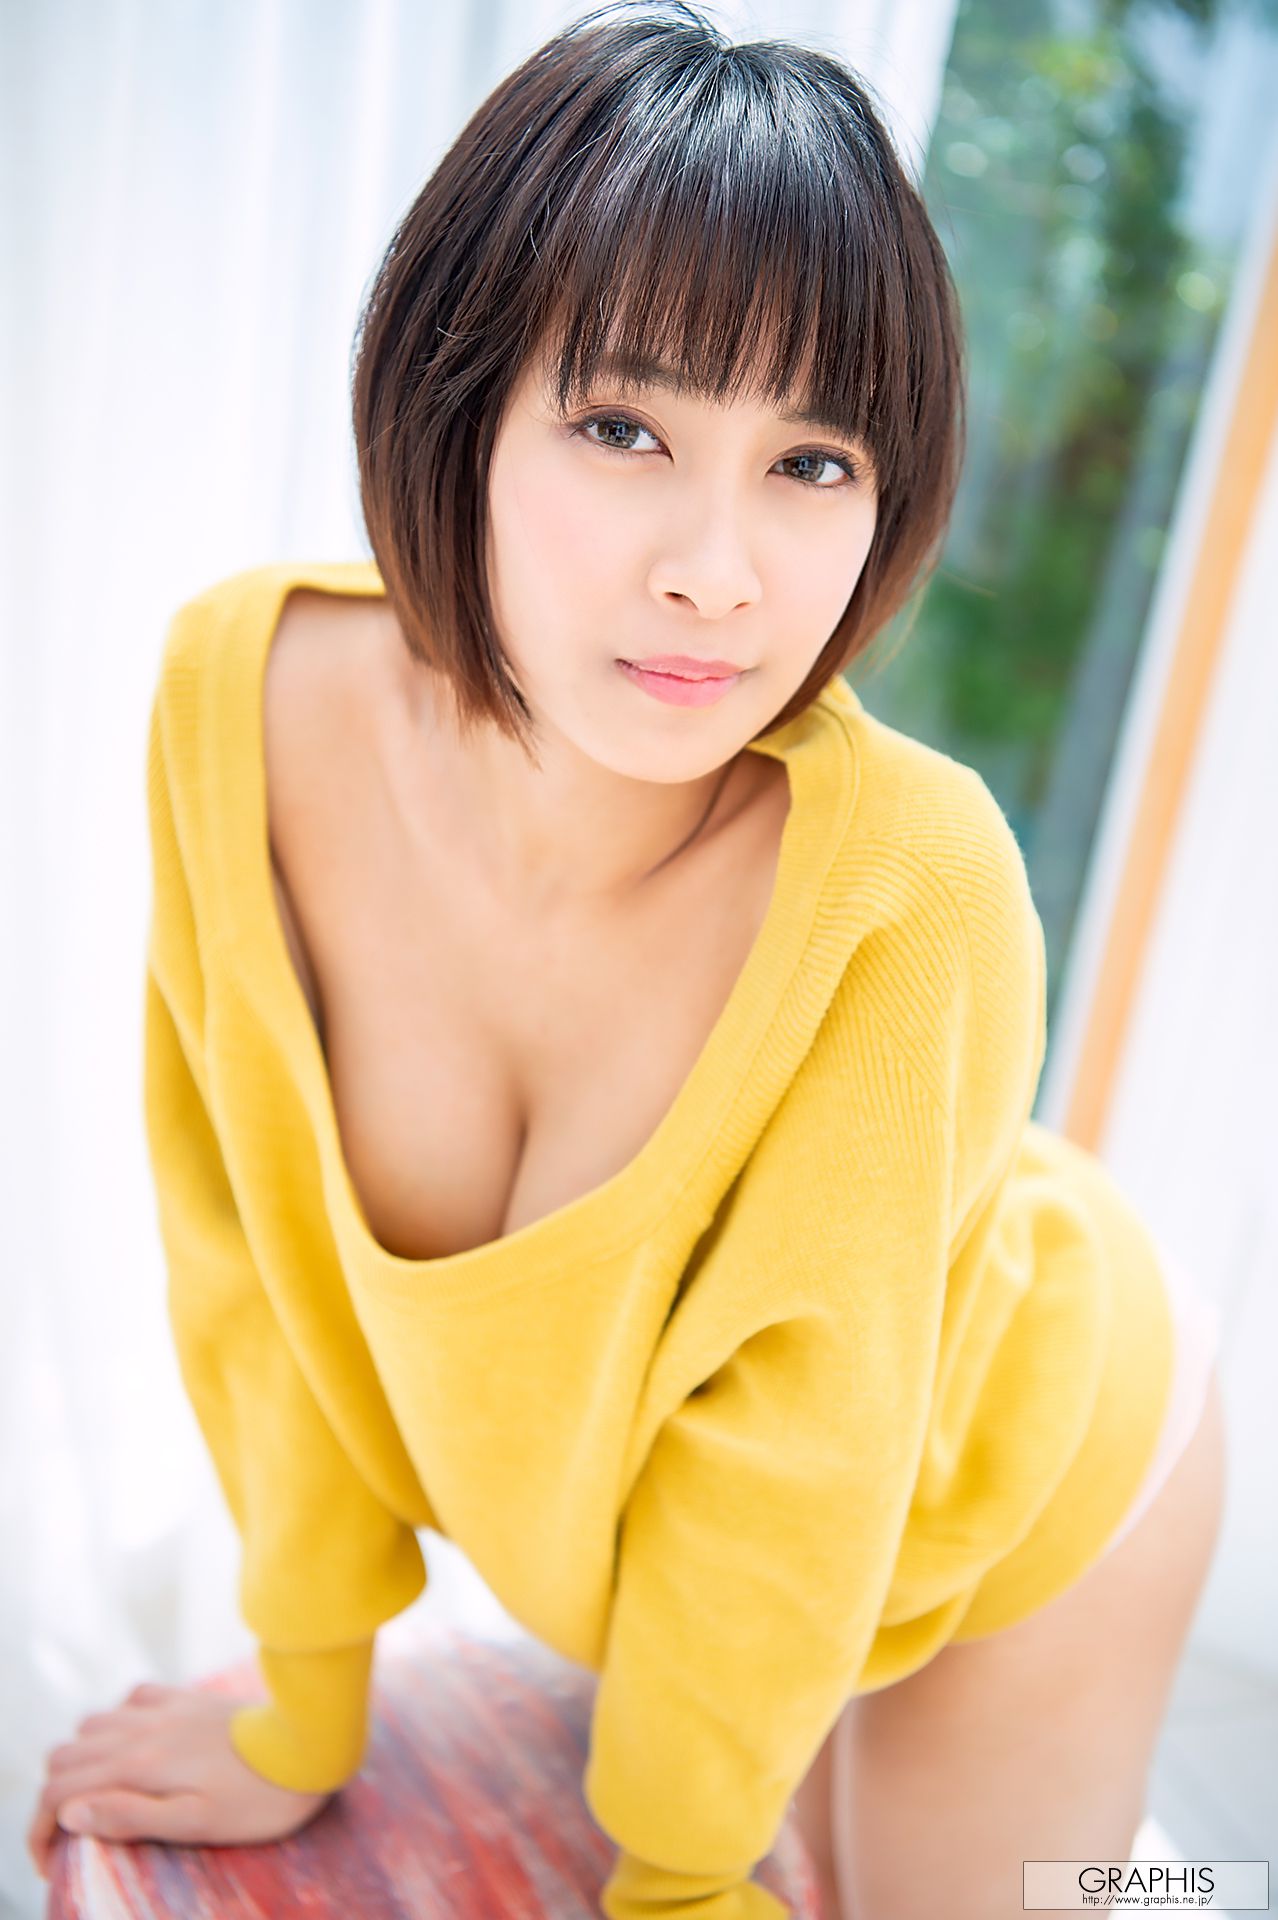 [Graphis] First Gravure 初脱ぎ娘 No.164 Rika Aimi 逢見リカ  第25张